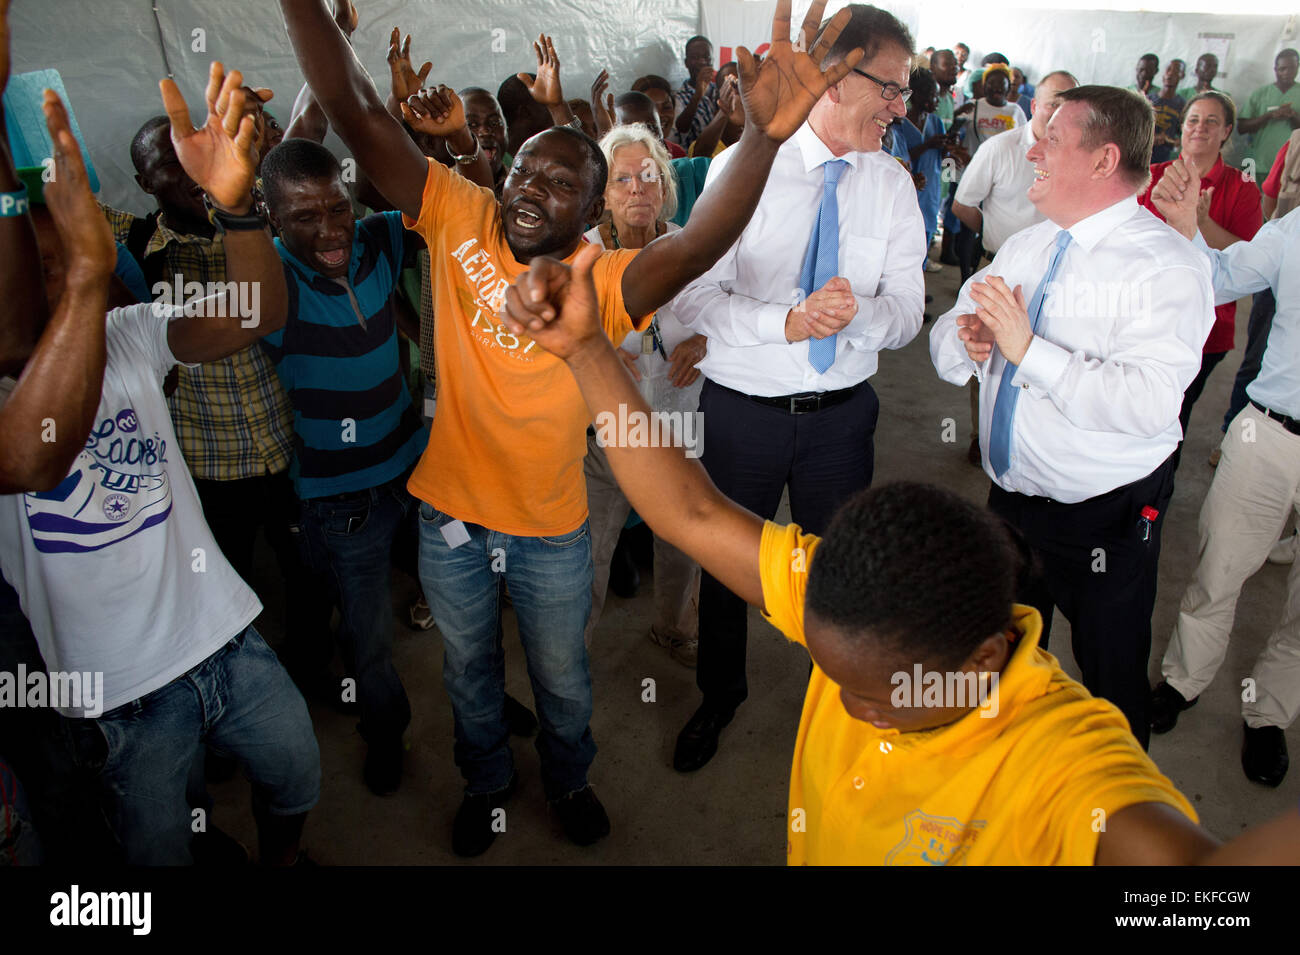 Monrovia, Liberia. 09th Apr, 2015. German Federal Minister of Health Hermann Groehe (R) and Minister of Development Gerd Mueller are welcomed with song and dance by volunteer Ebola helpers at the SITTU (Severe Infections Temporary Treatment Unit) in Monrovia, Liberia, 09 April 2015. German Federal Ministers Groehe and Mueller are traveling to Liberia and visiting the SITTU in order to discuss reconstruction after the Ebola epidemic. Photo: KAY NIETFELD/dpa/Alamy Live News Stock Photo